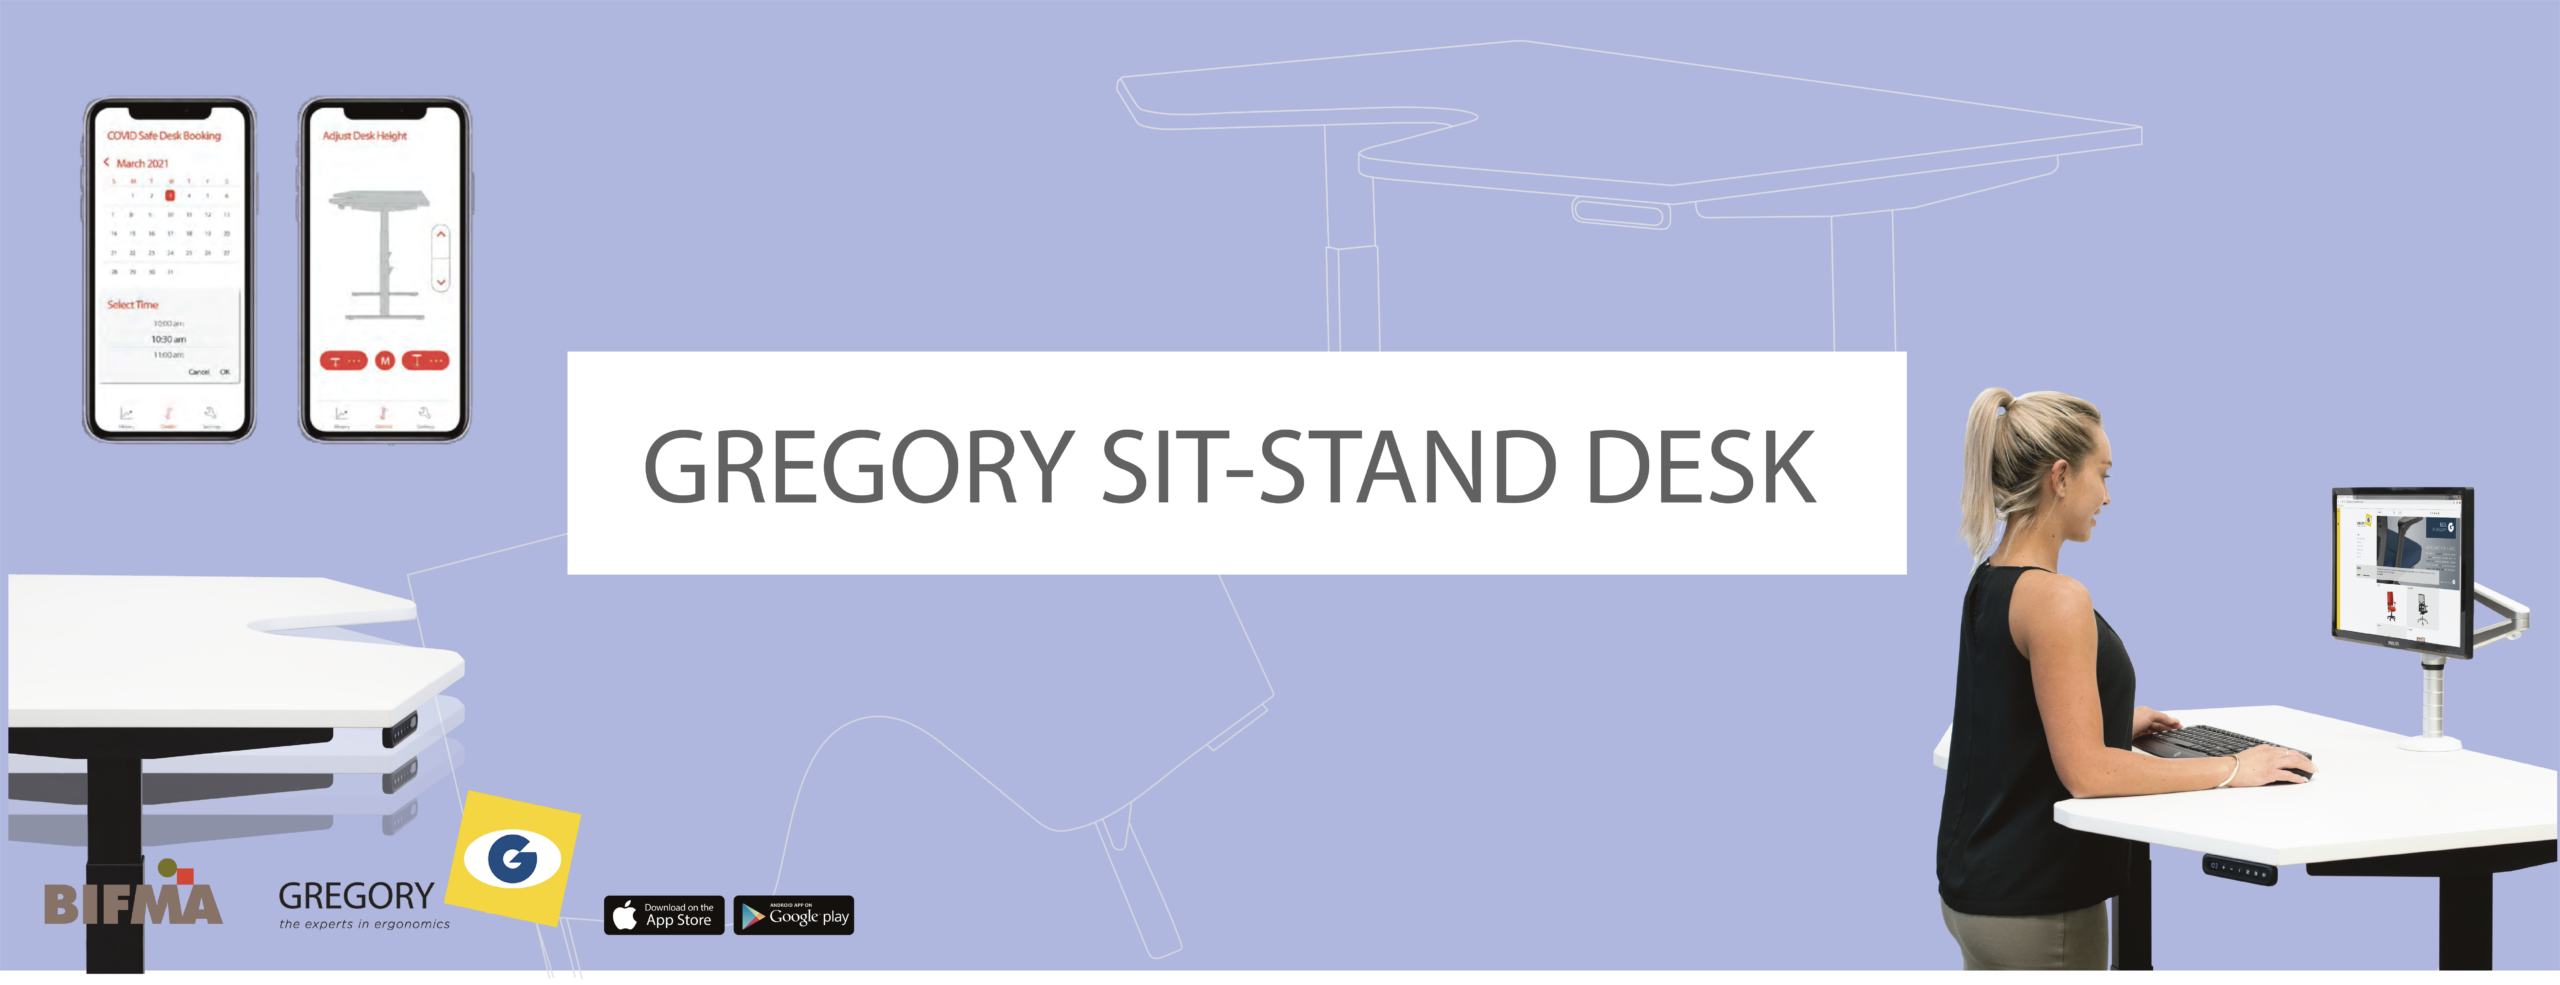 GREGORY SIT-STAND DESK